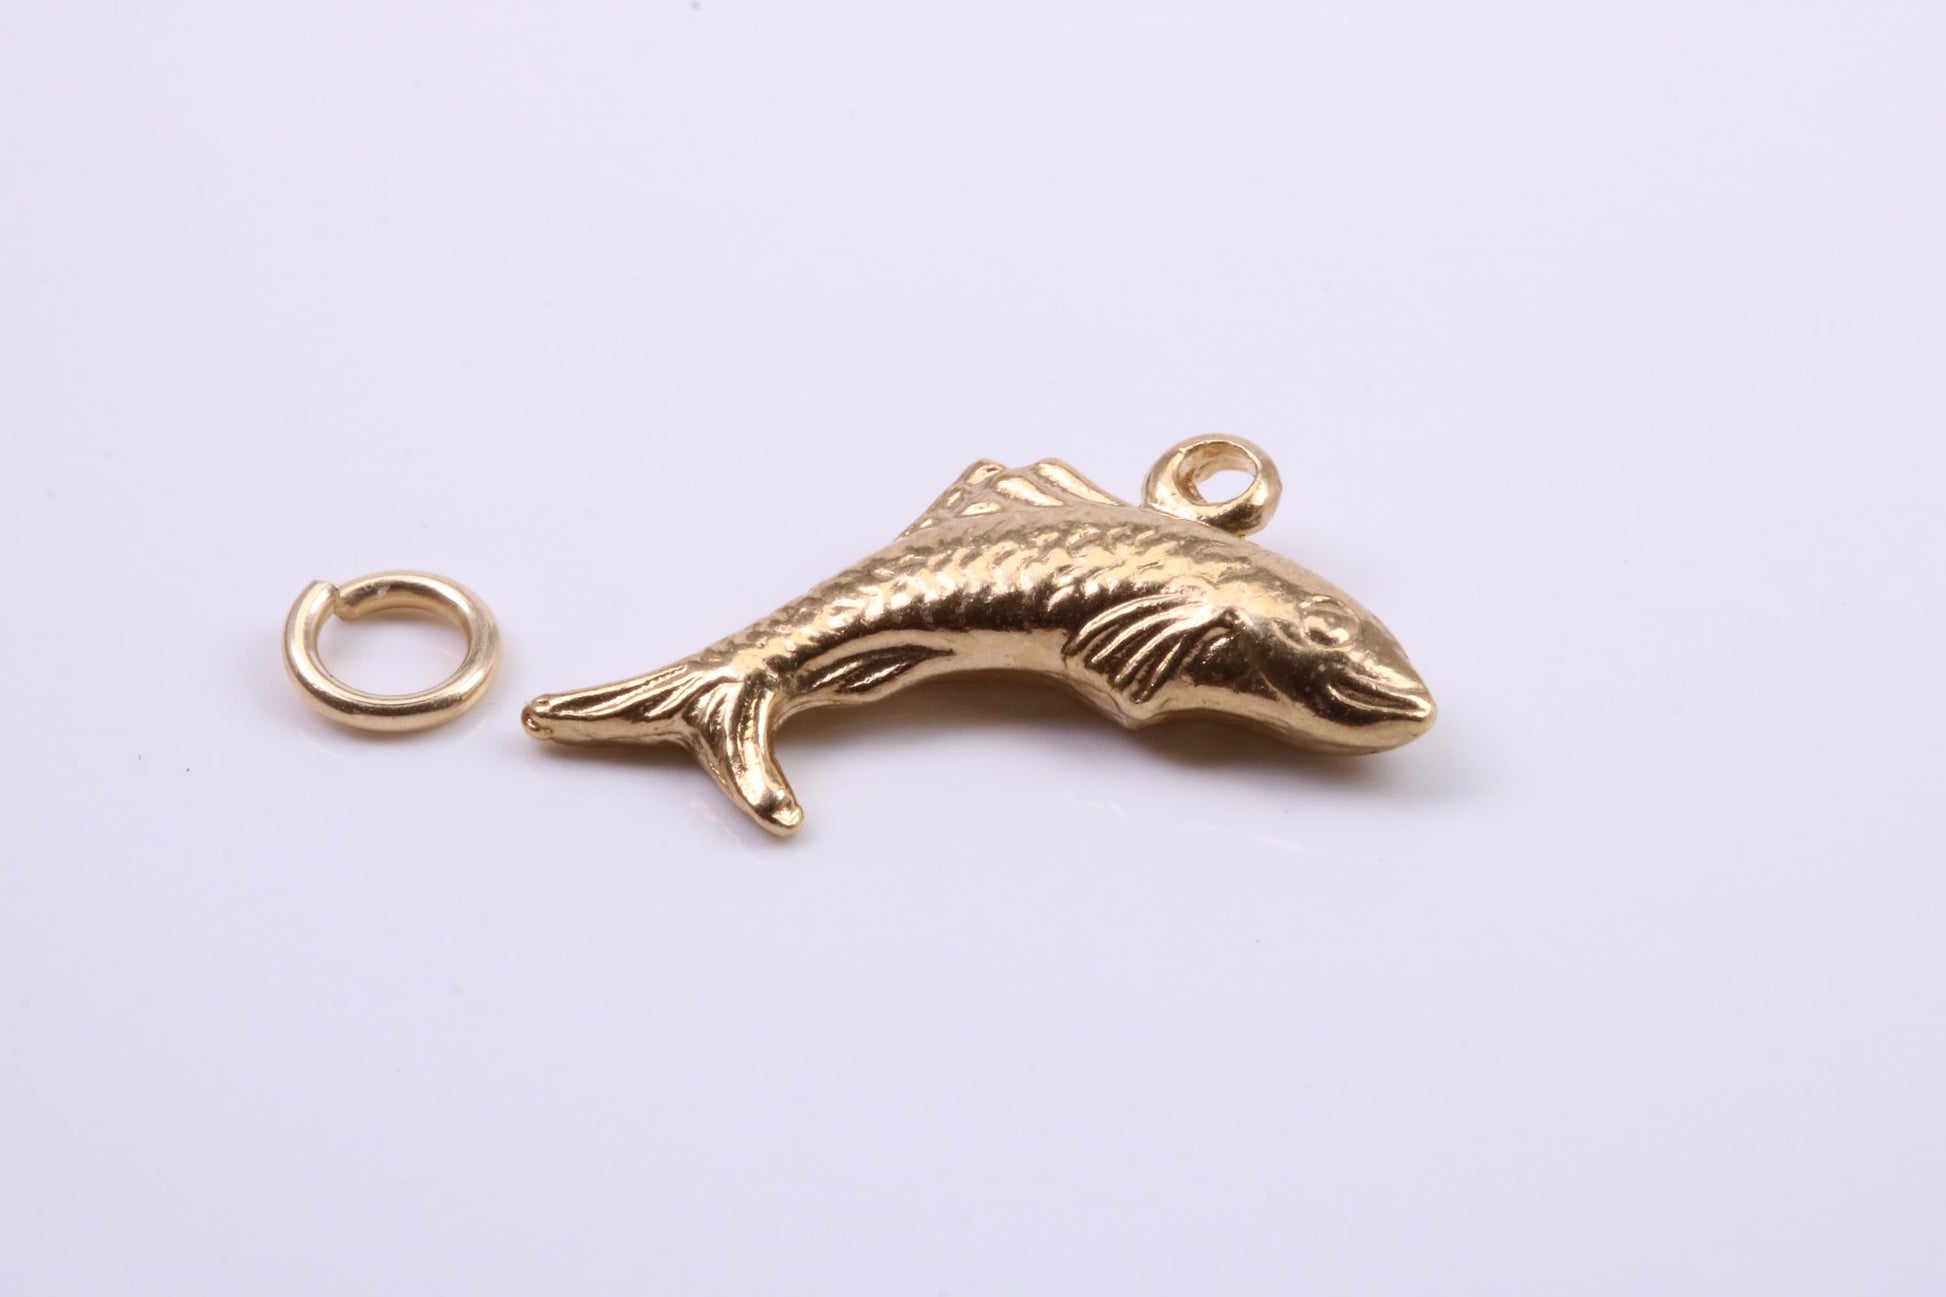 Salmon Fish Charm, Traditional Charm, Made from Solid 9ct Yellow Gold, British Hallmarked, Complete with Attachment Link